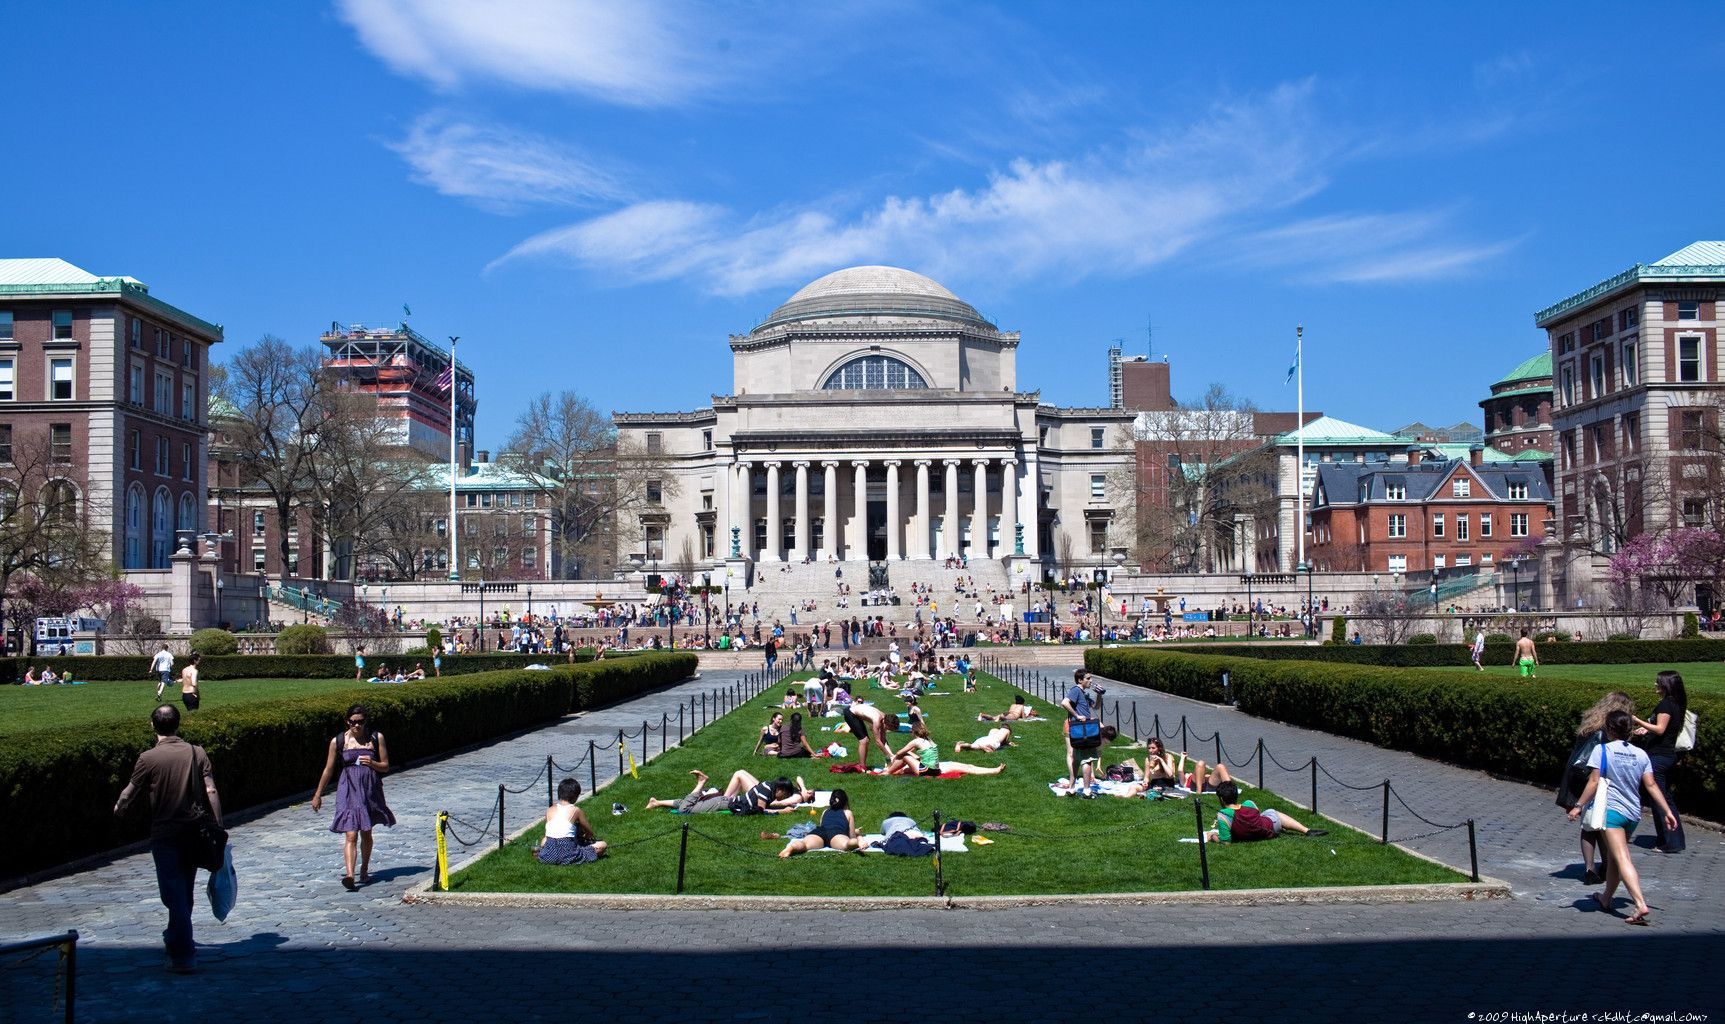 People relaxing on the grass in front of a large building. - Columbia University